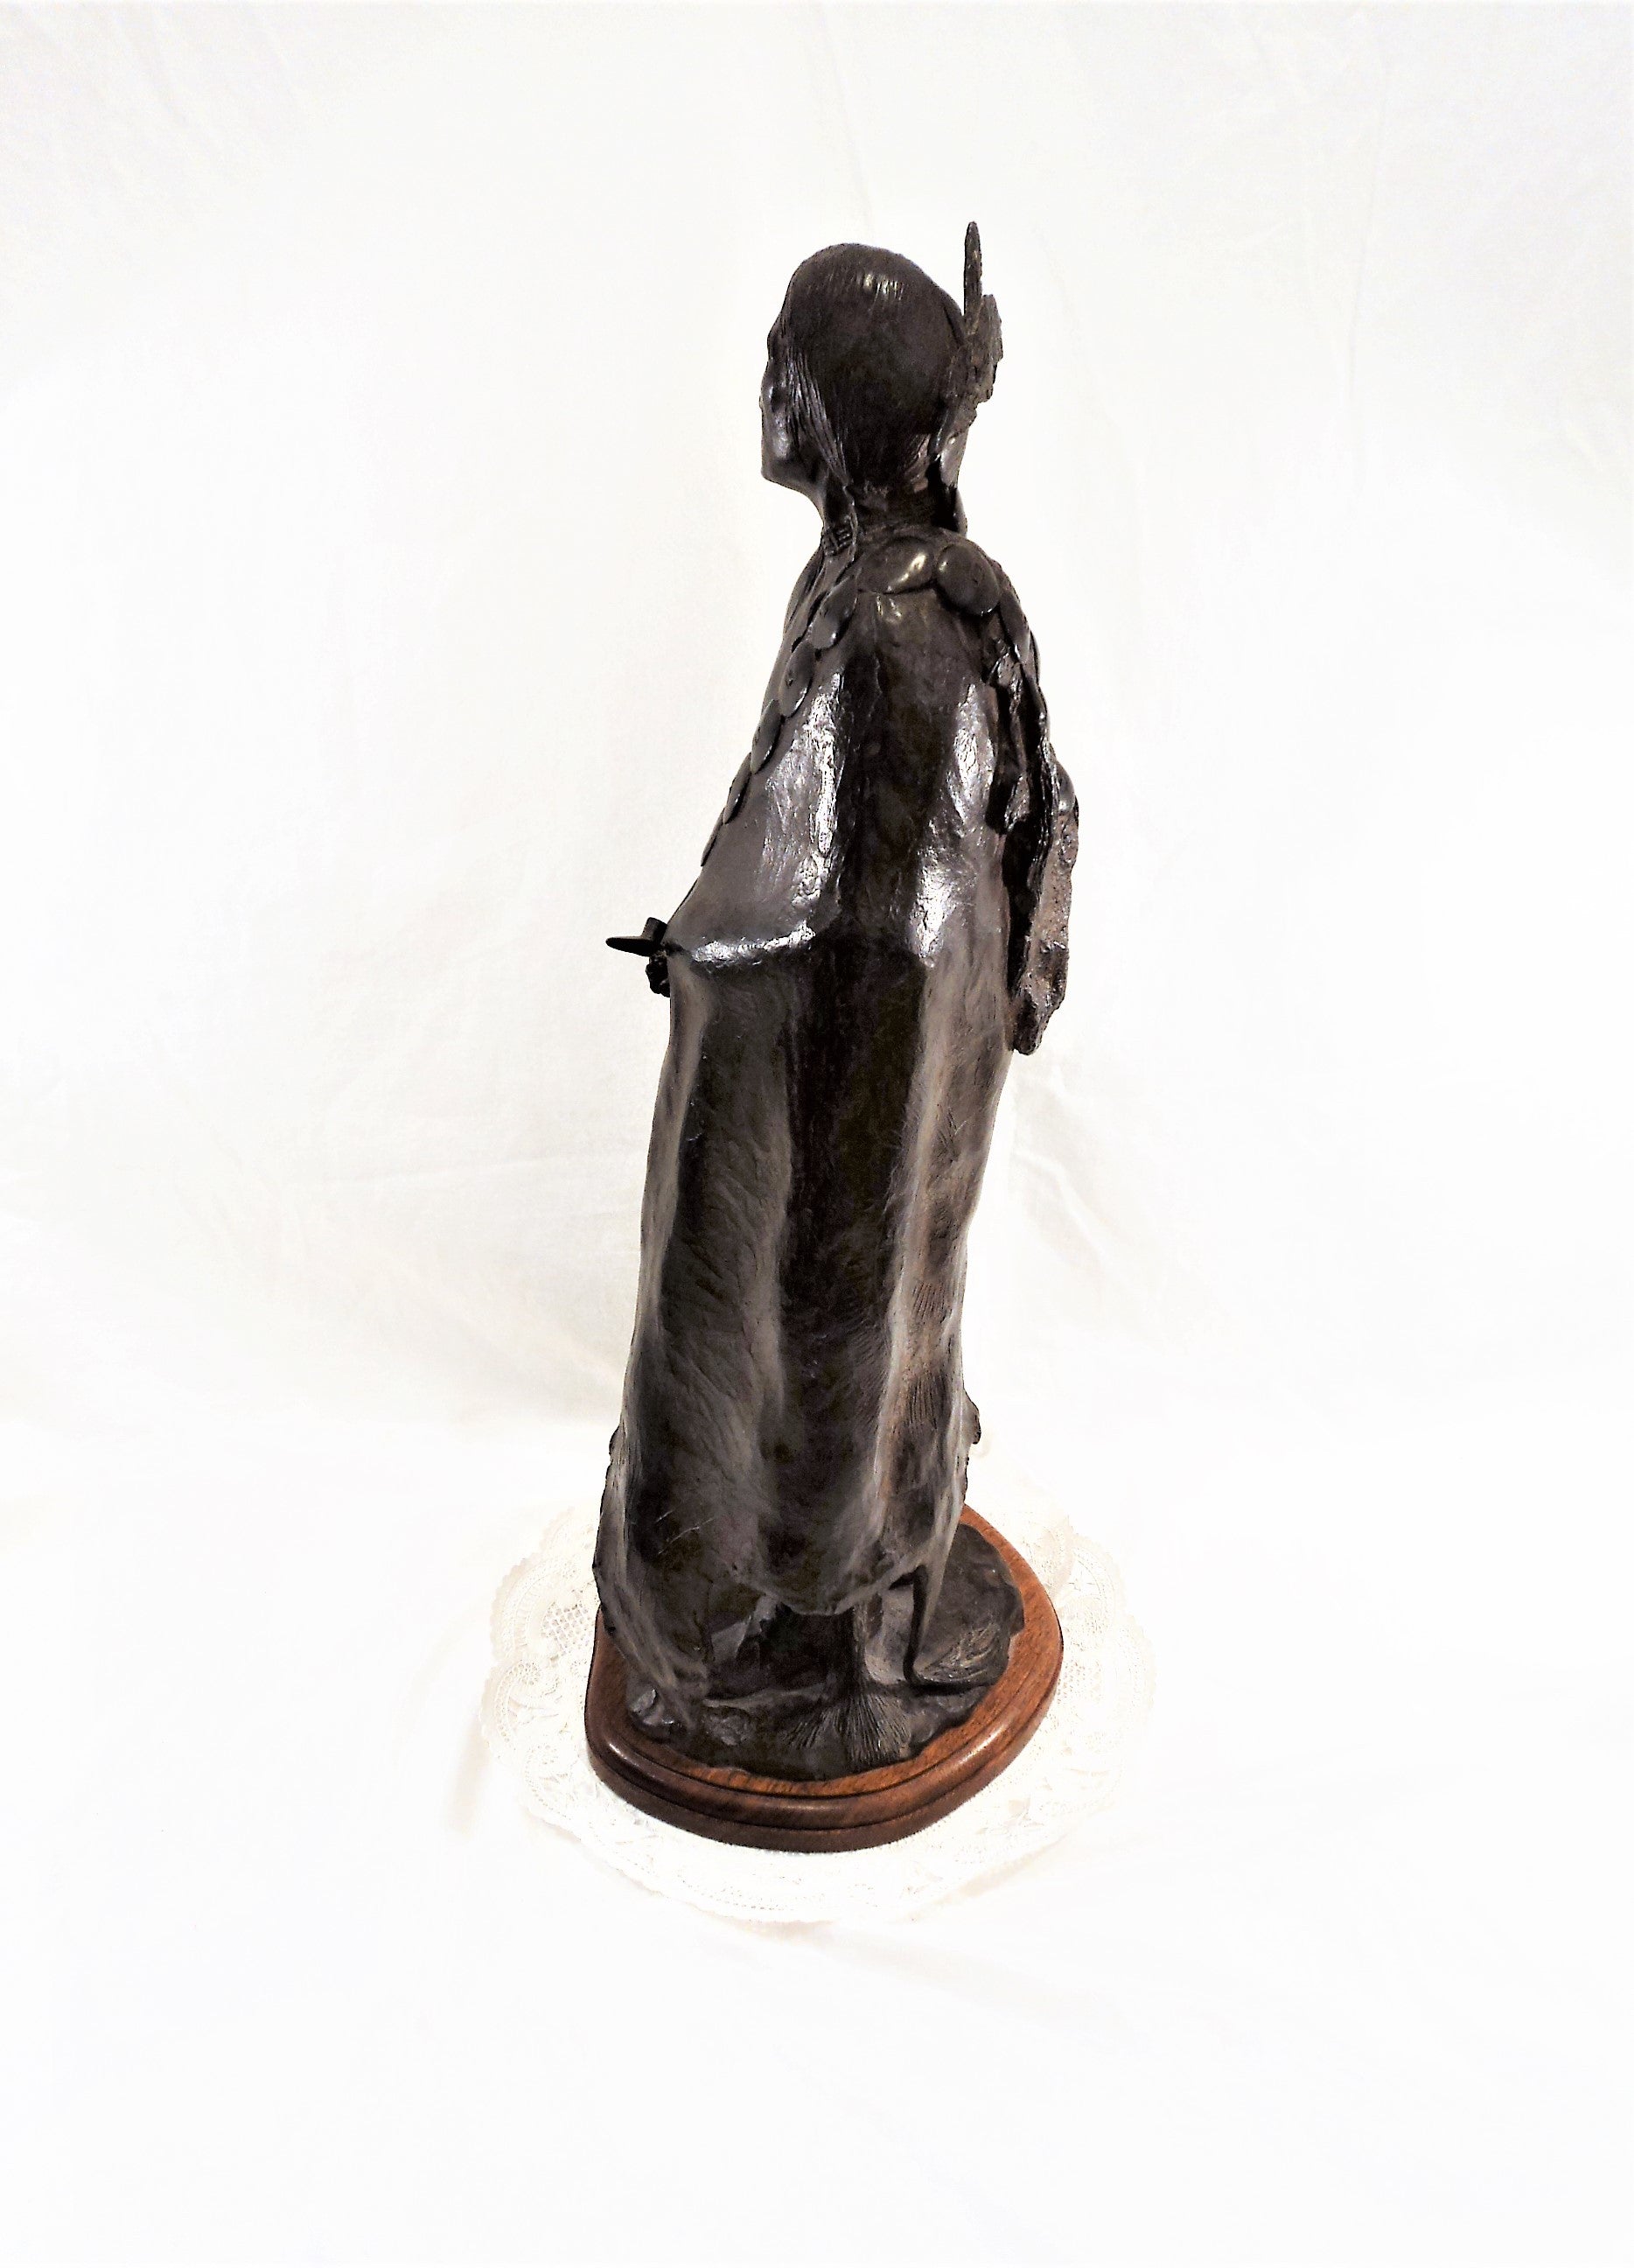 Signed Limited Edition Bronze Sculpture 